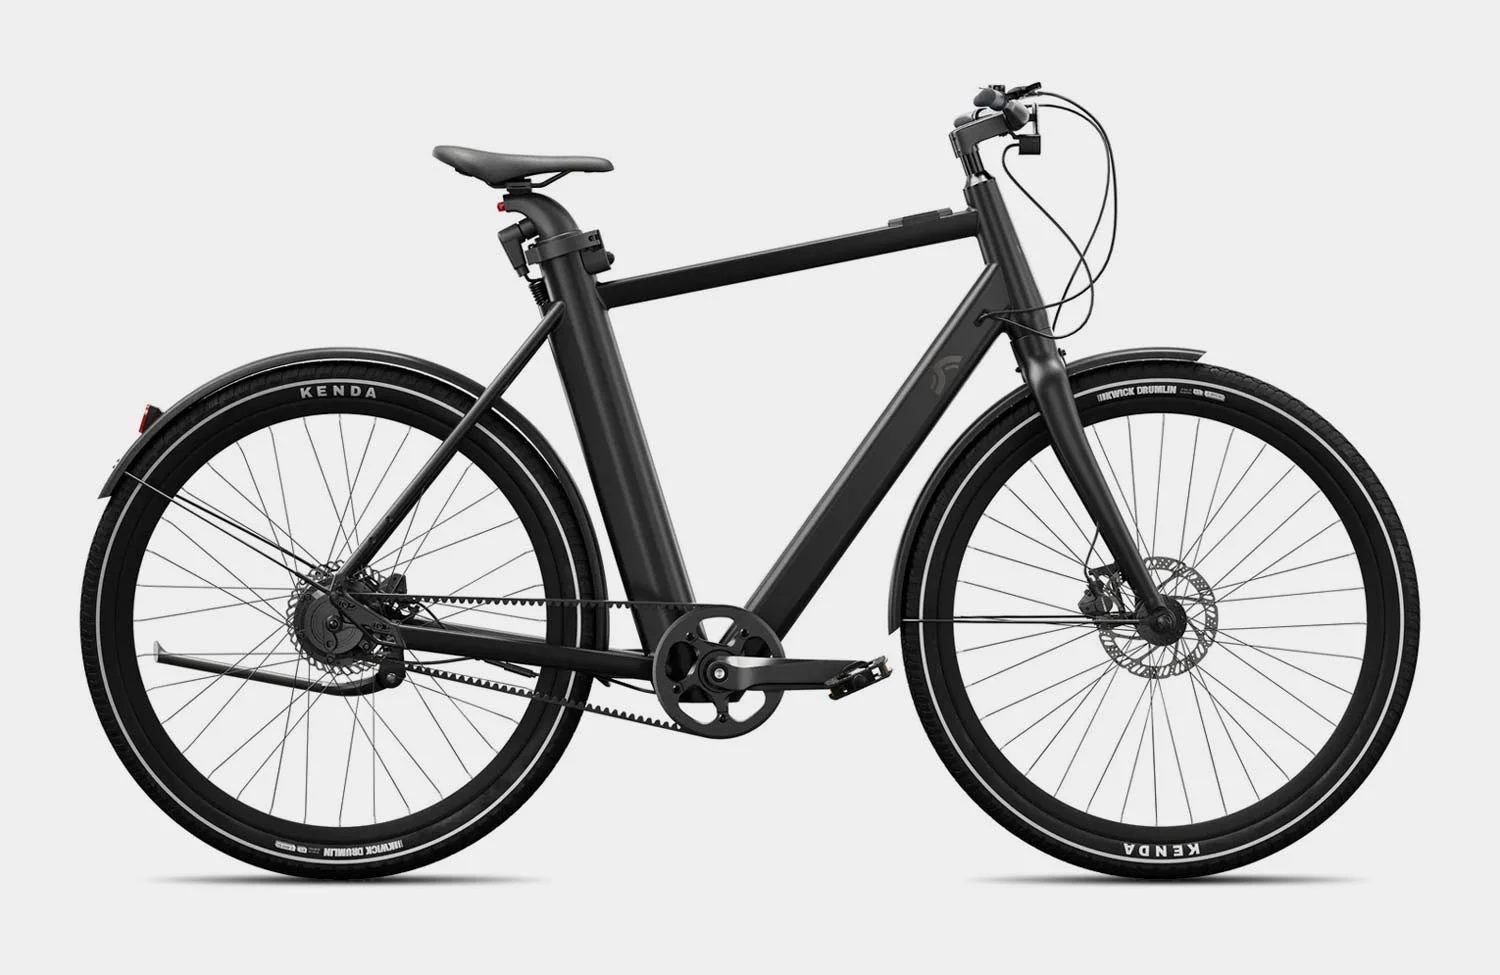 An take from e-bike — Lidl bike from Crivit new urban the look the discounter: we a at